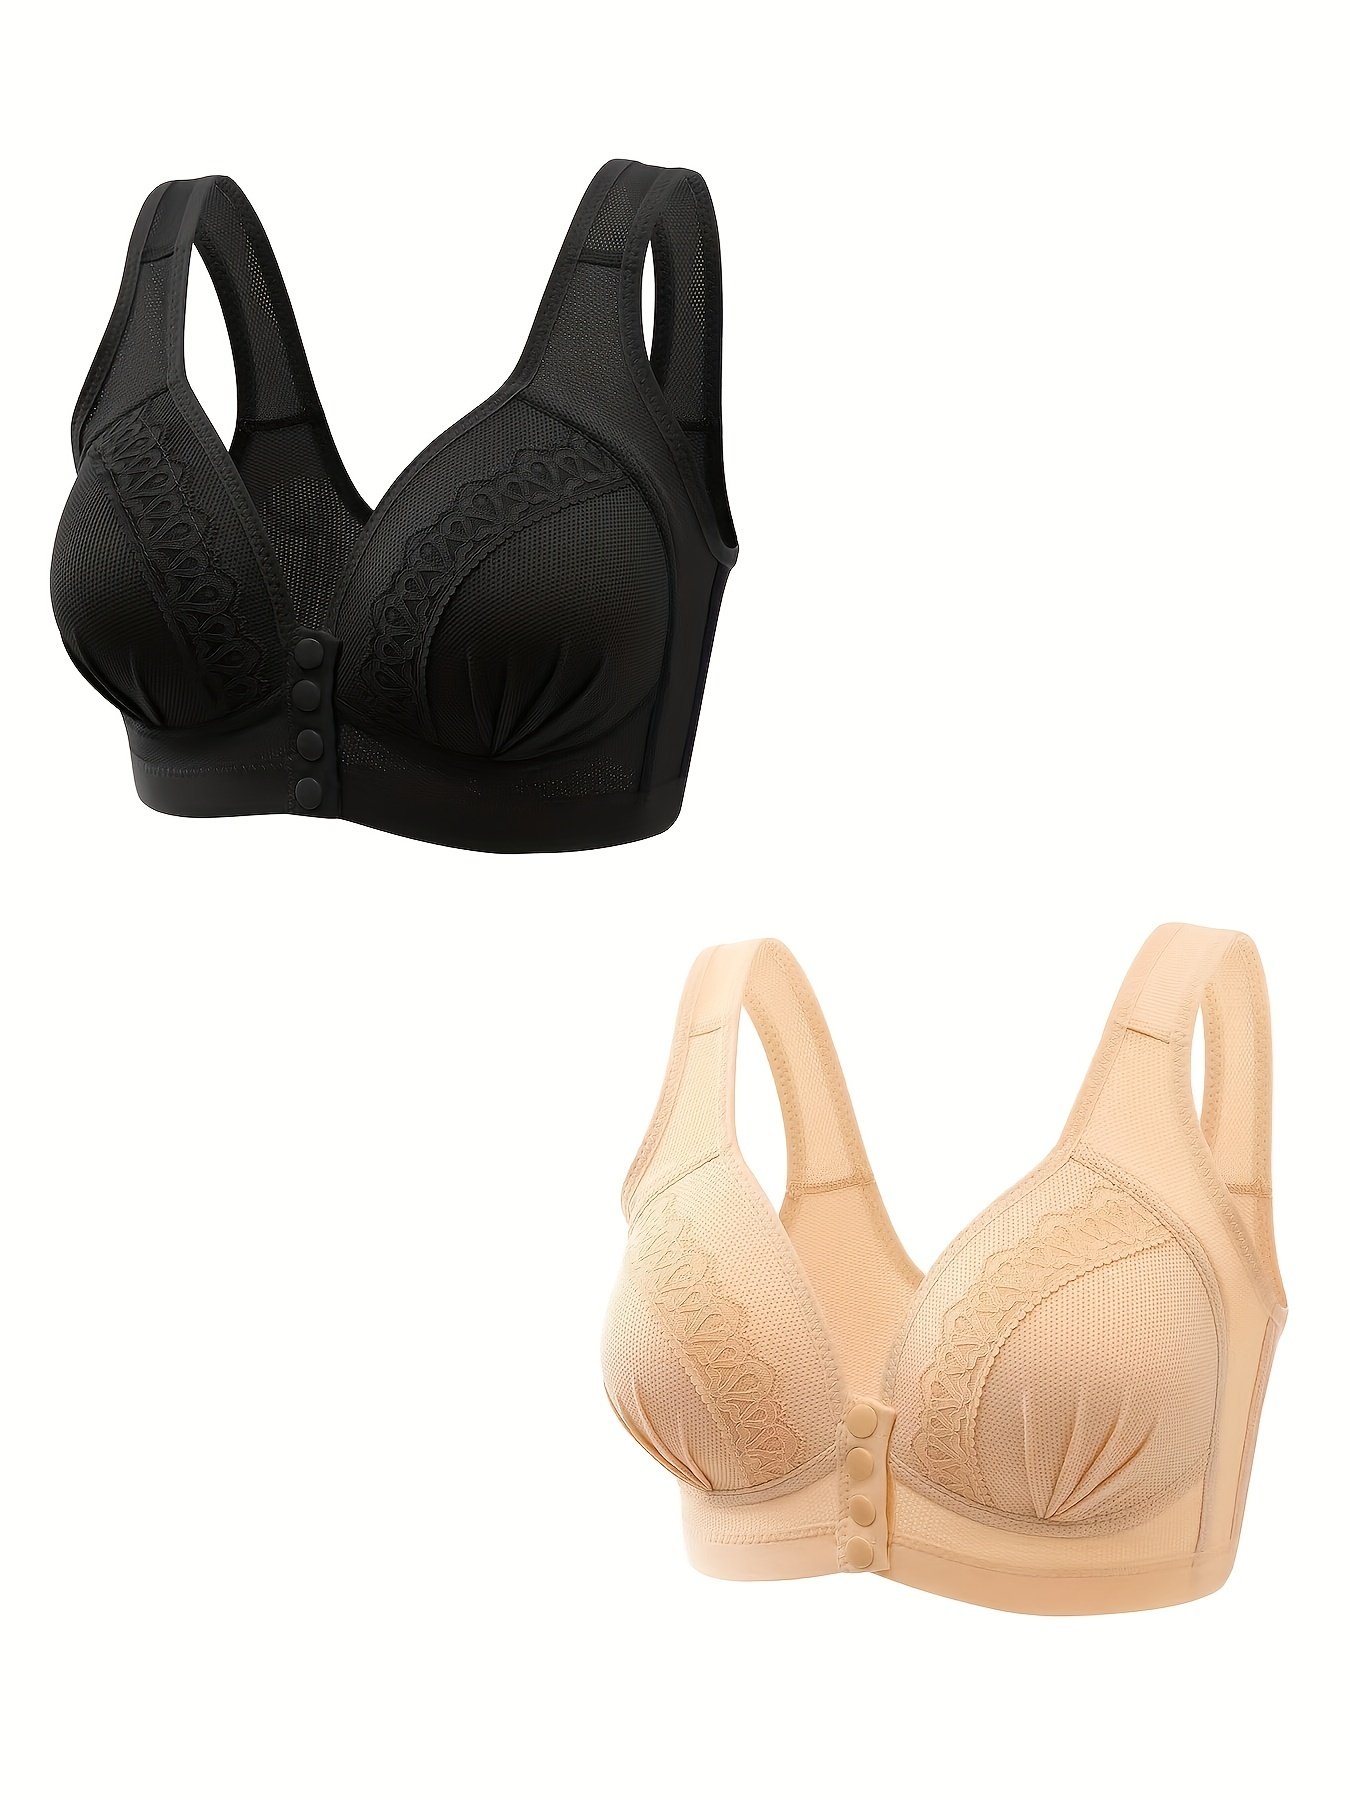 Buy SUBHAM SALES CORP KB FOAM PADDED BRA Online at Best Prices in